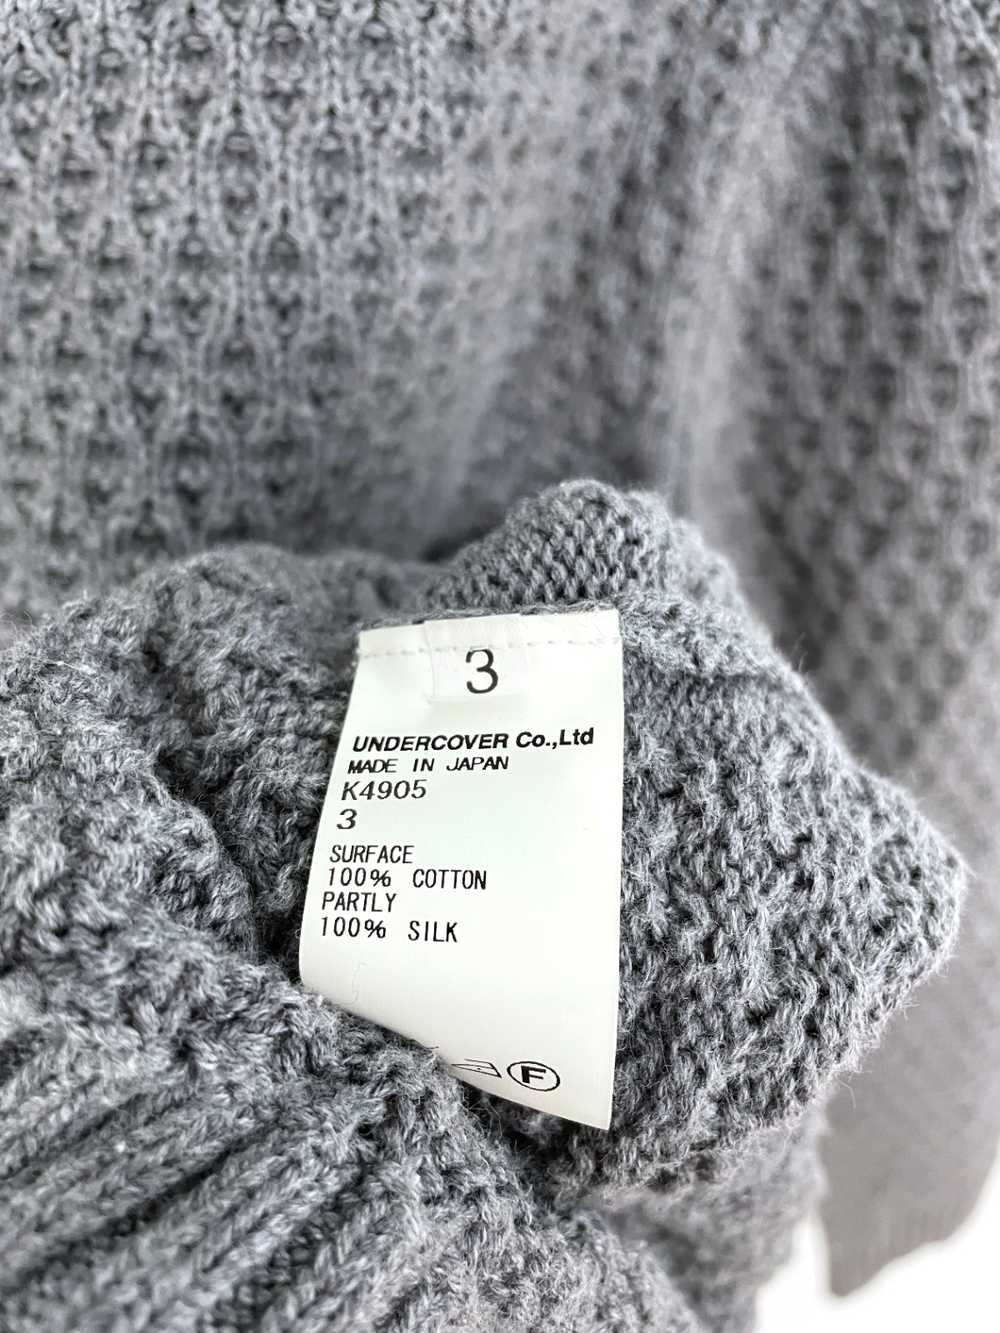 UNDERCOVER SS13 Heaven Talking Heads Sweater - image 5